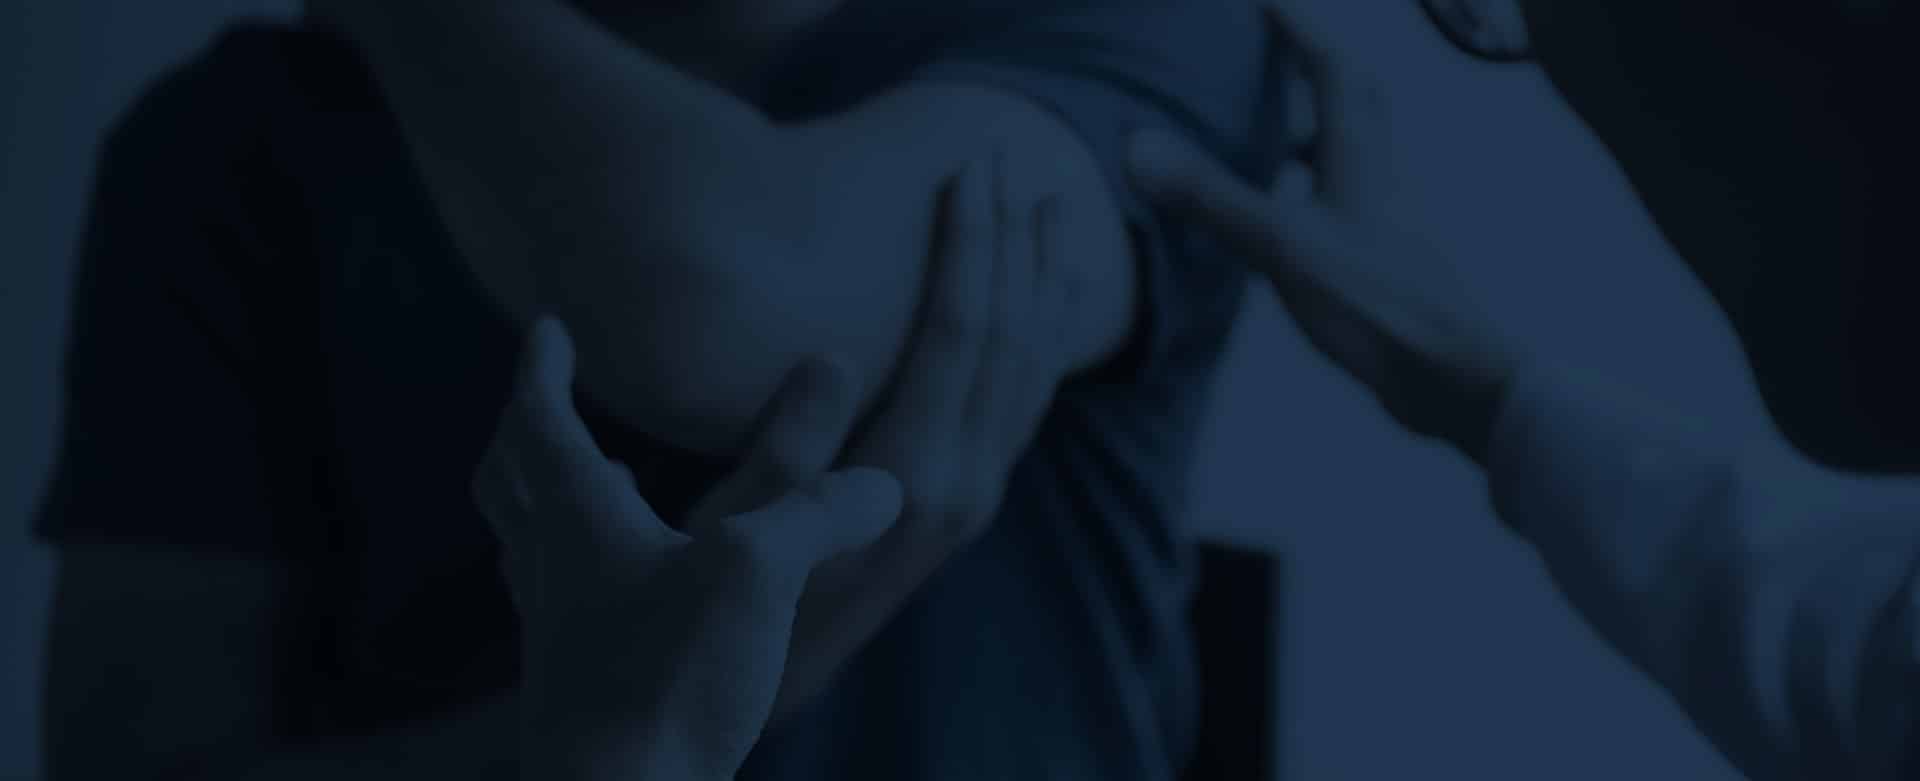 Elbow Pain and Injury